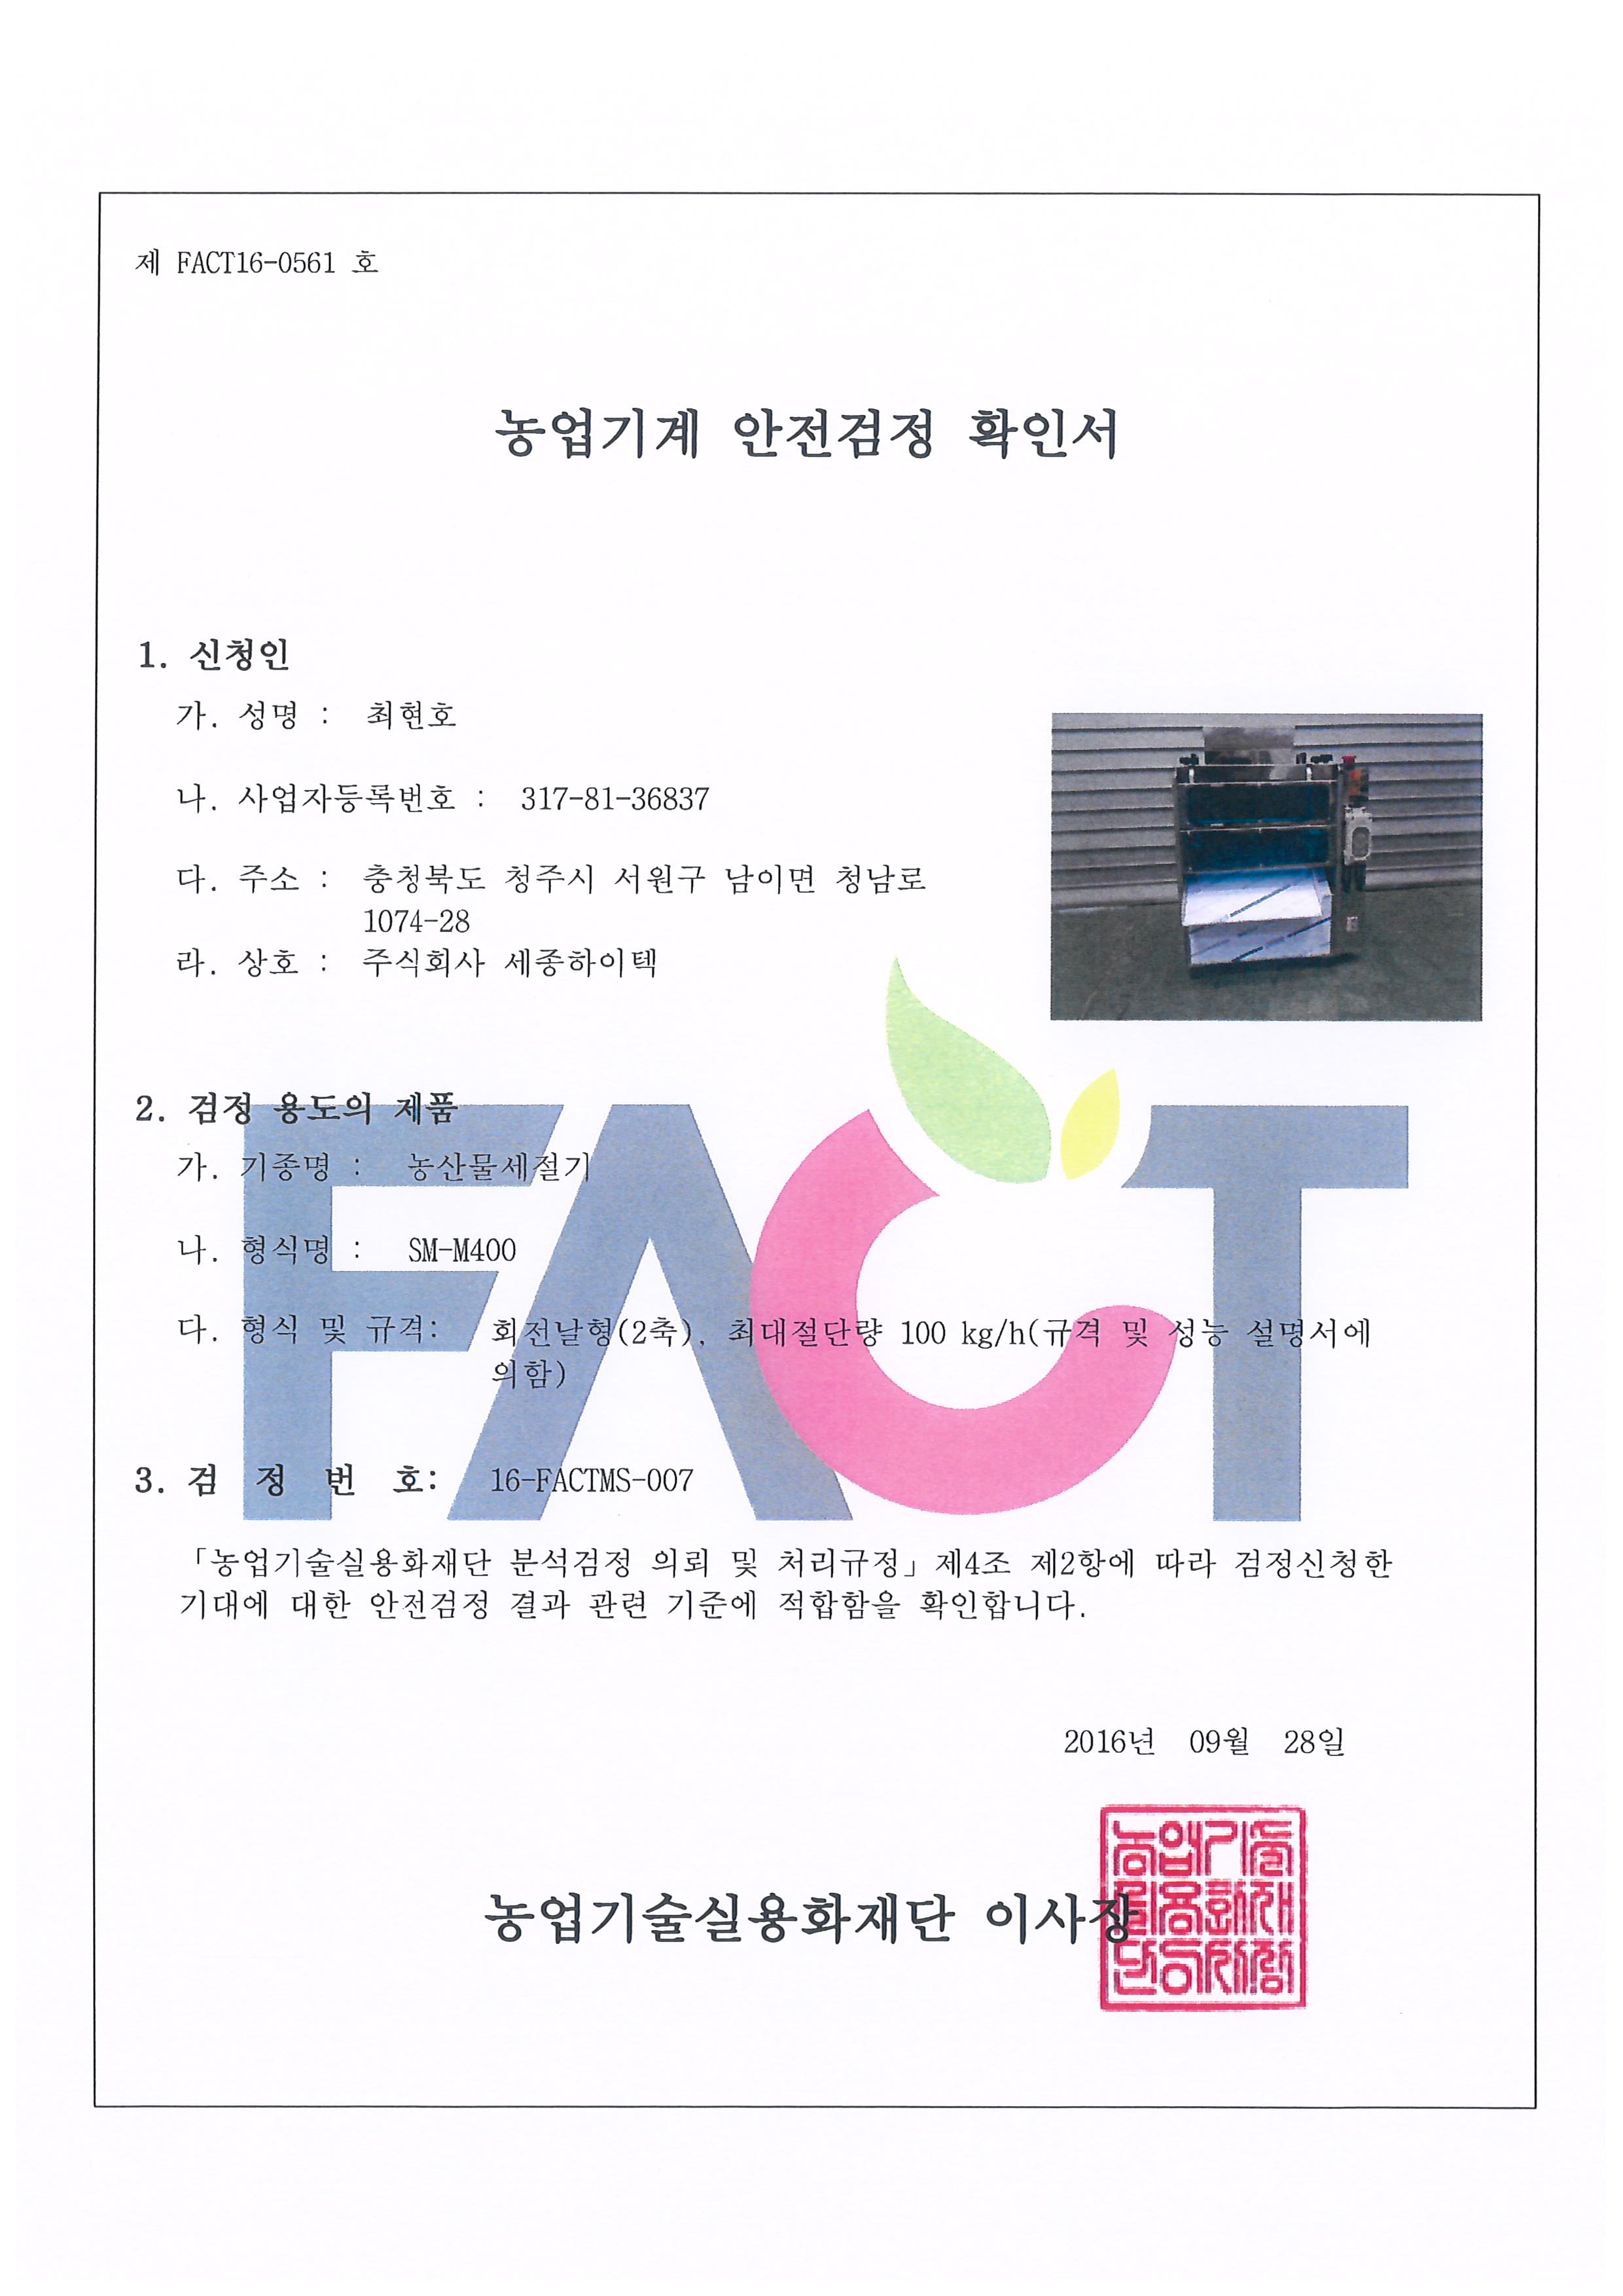 Certification-Agricultural machinery safety inspection certificate-M400 [첨부 이미지1]